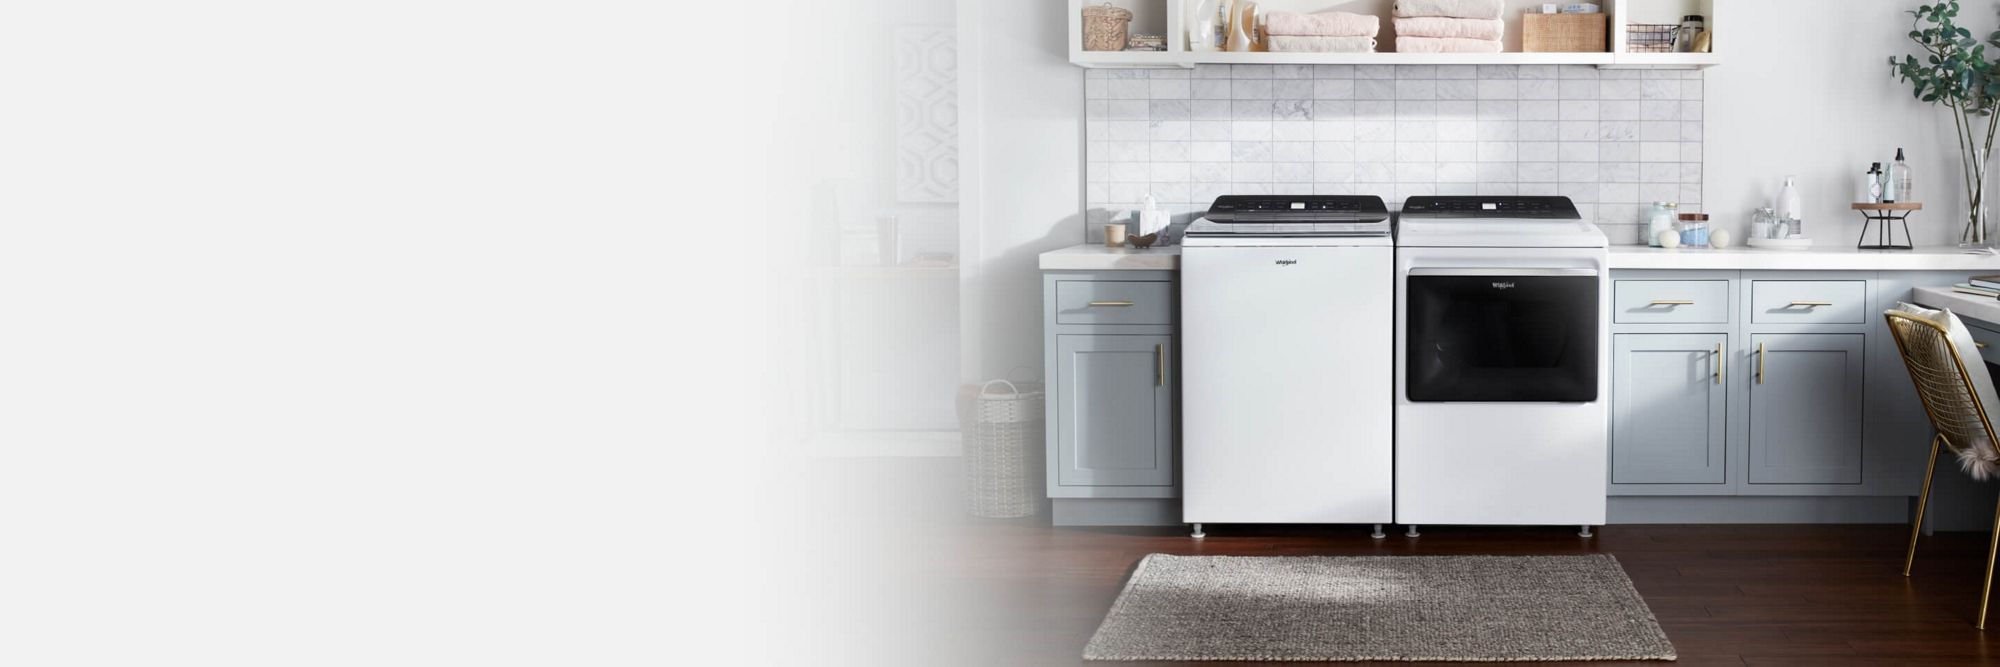 Get clothes clean, fast with a Whirlpool® laundry machine.